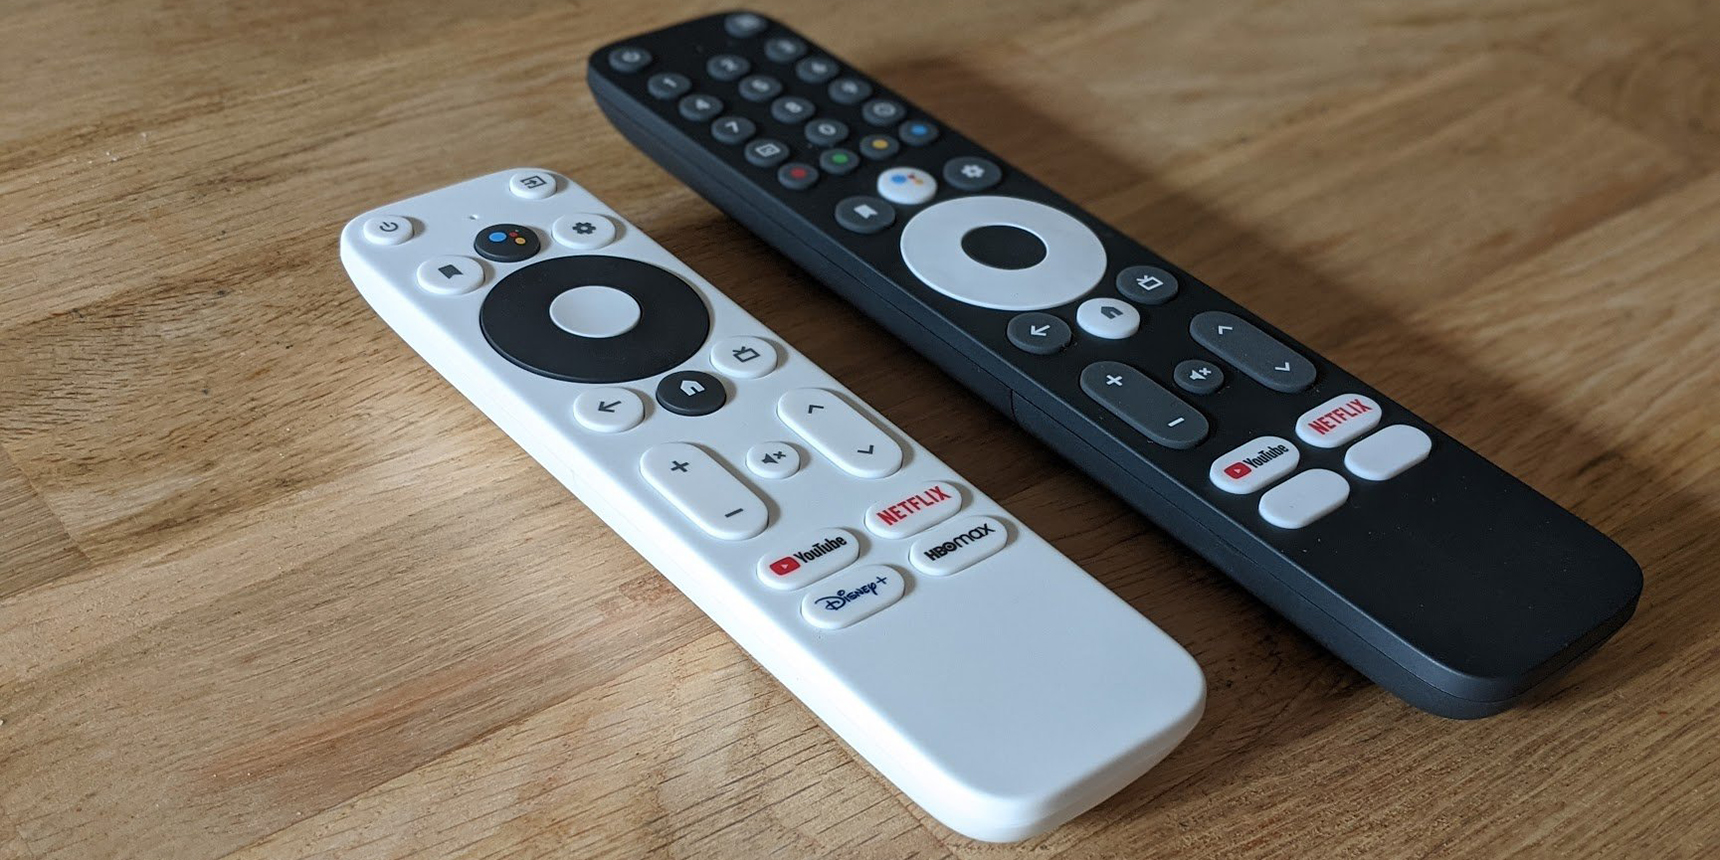  New Universal Remote Control Compatible with Google